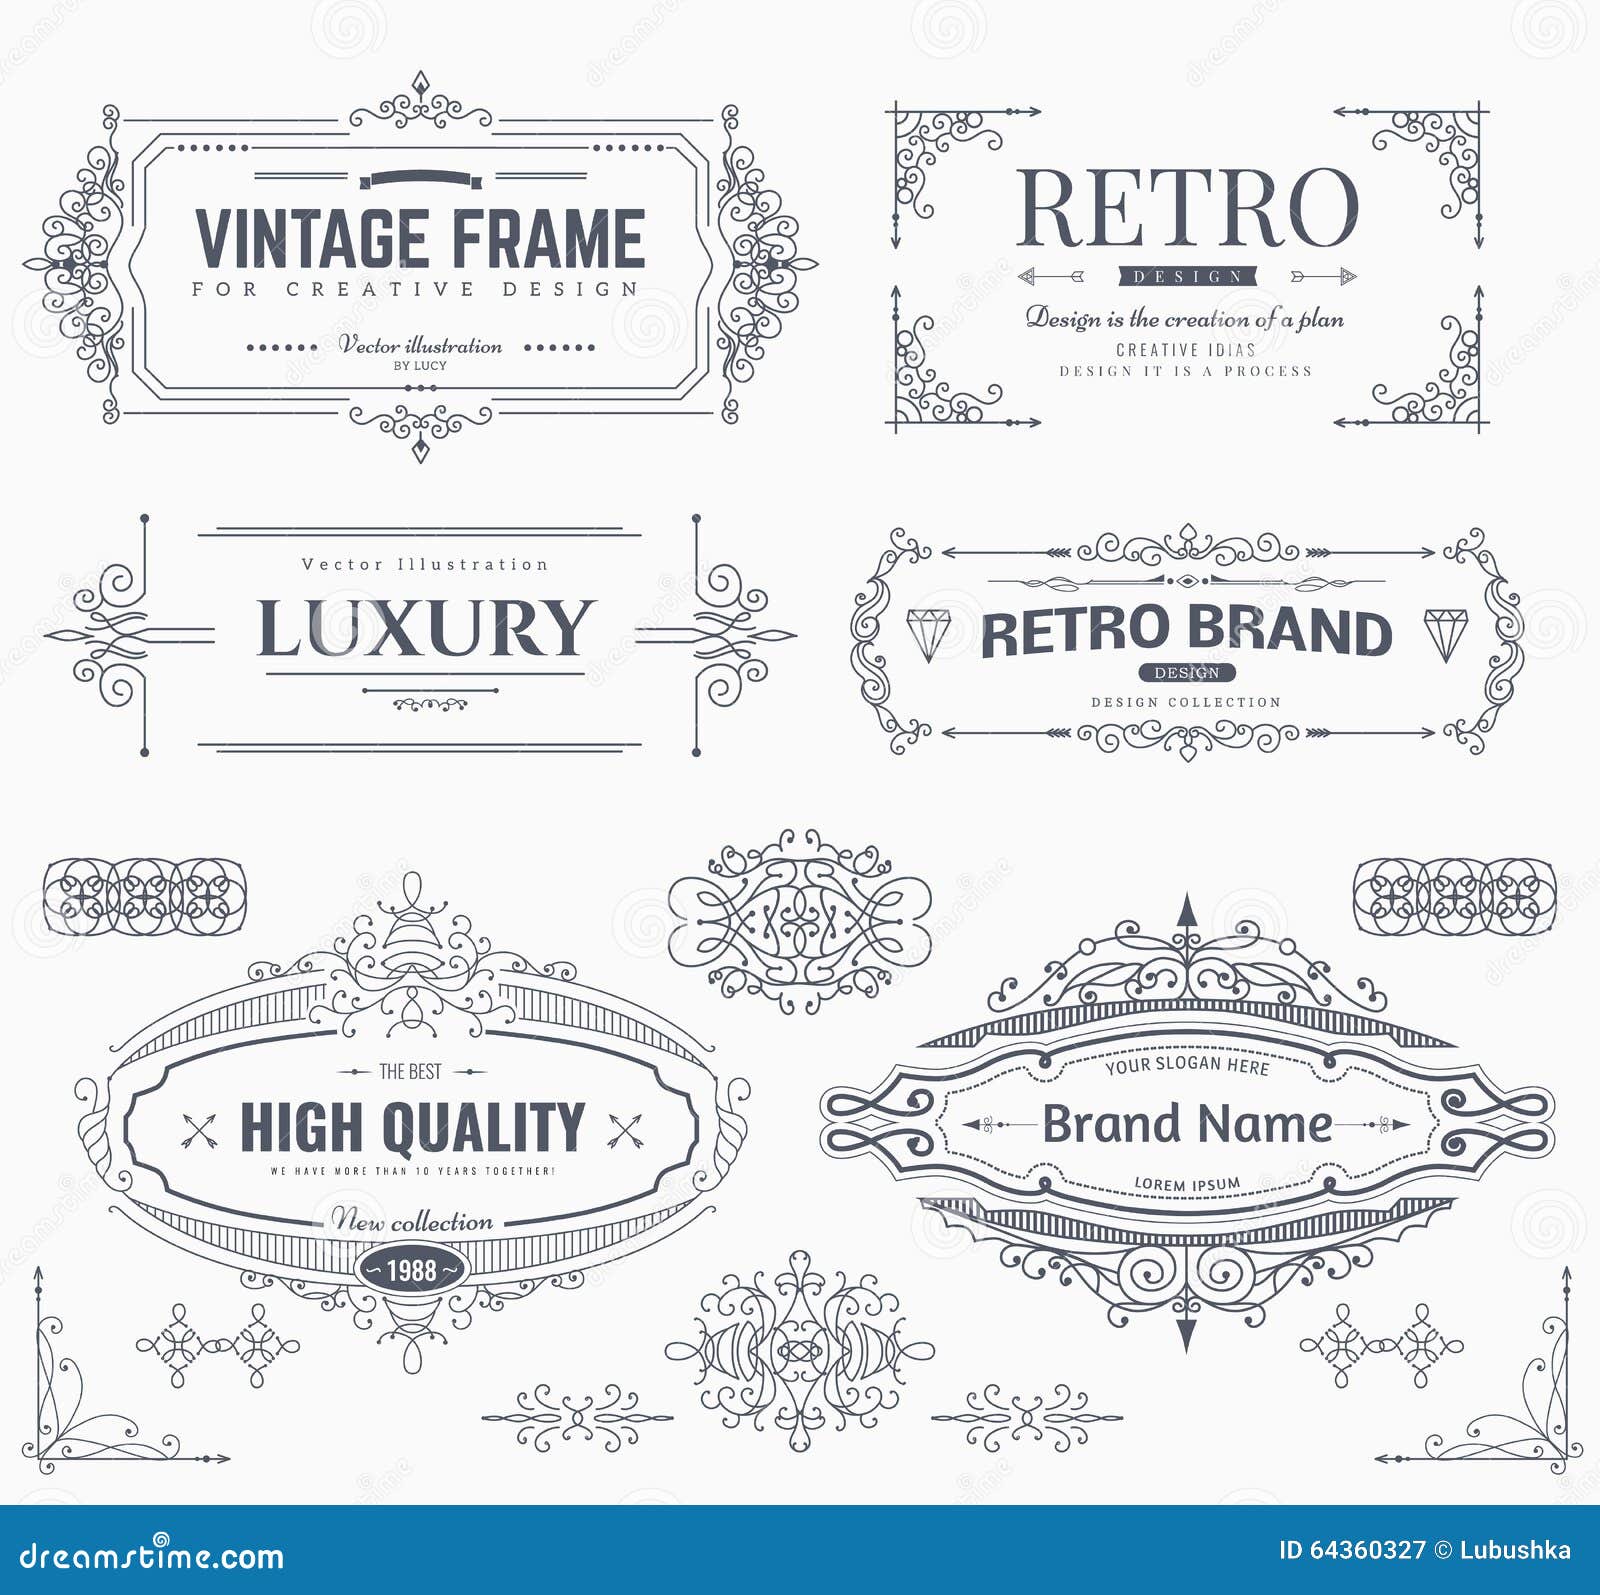  collection of vintage patterns